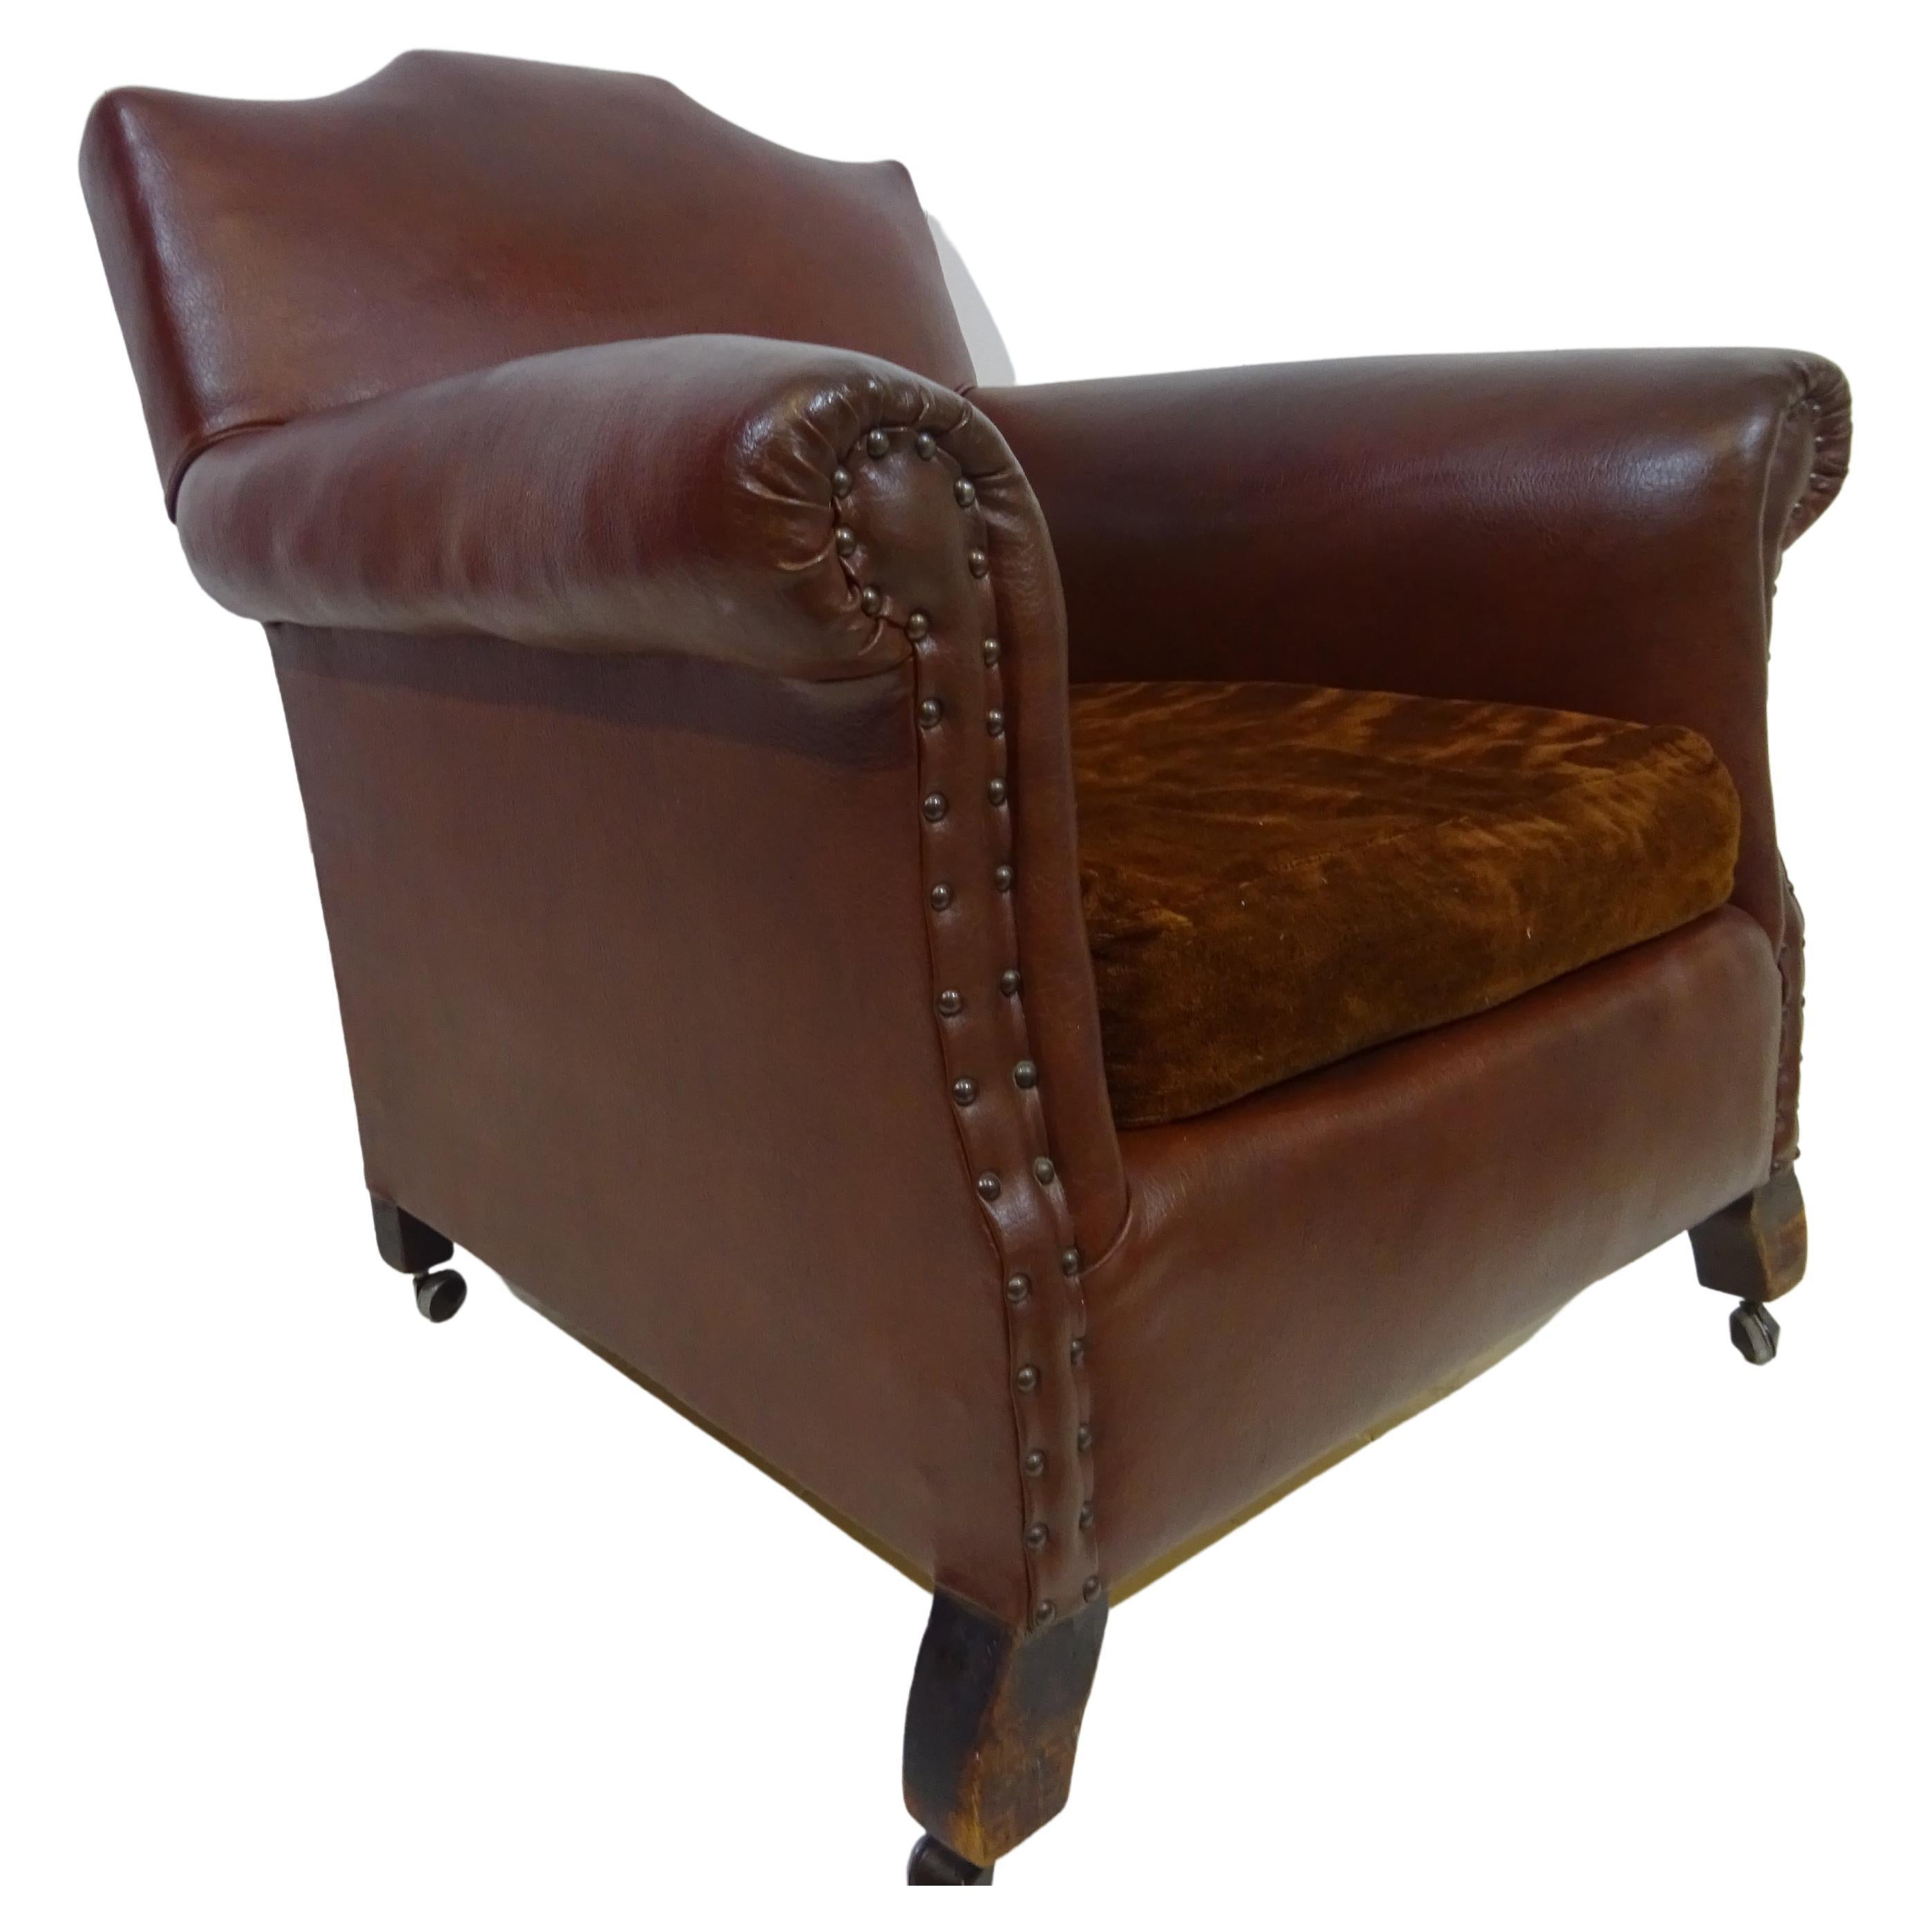 Original 1920's Art Deco Club Chair in Brown Faux Leather